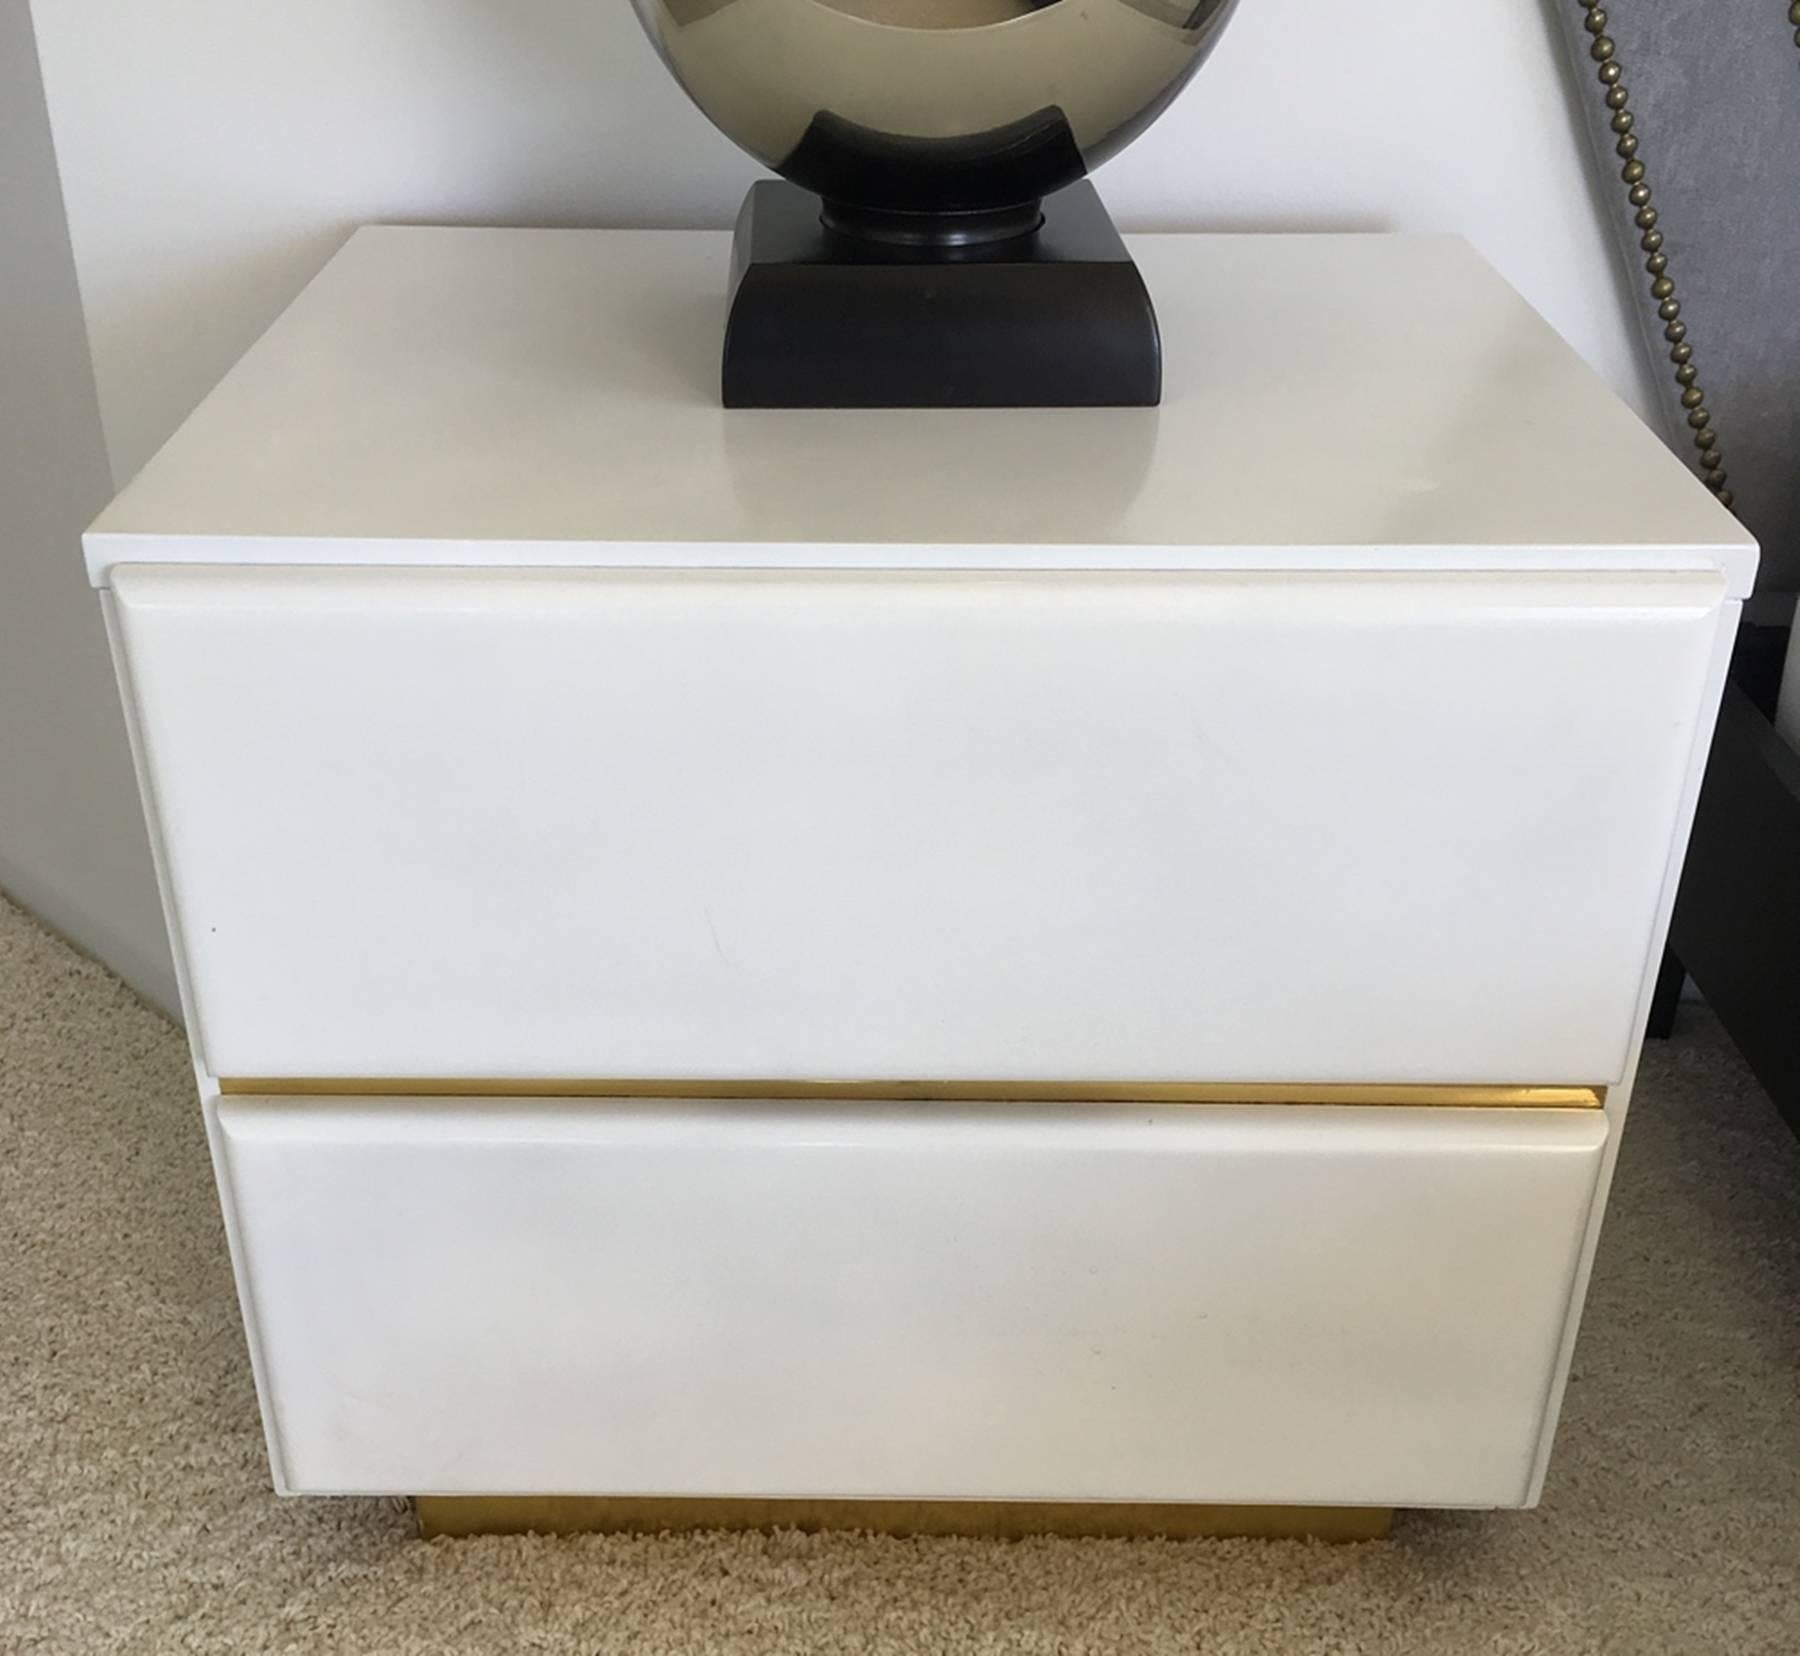 Beautiful pair of nightstand designed and manufactured by Lane Furniture and has a modern 1980s look. The nightstands comes with two drawers and brass trim around the bottom and between the drawers. 

Measurements:
24.0ʺ wide × 16.0ʺ deep × 20.0ʺ